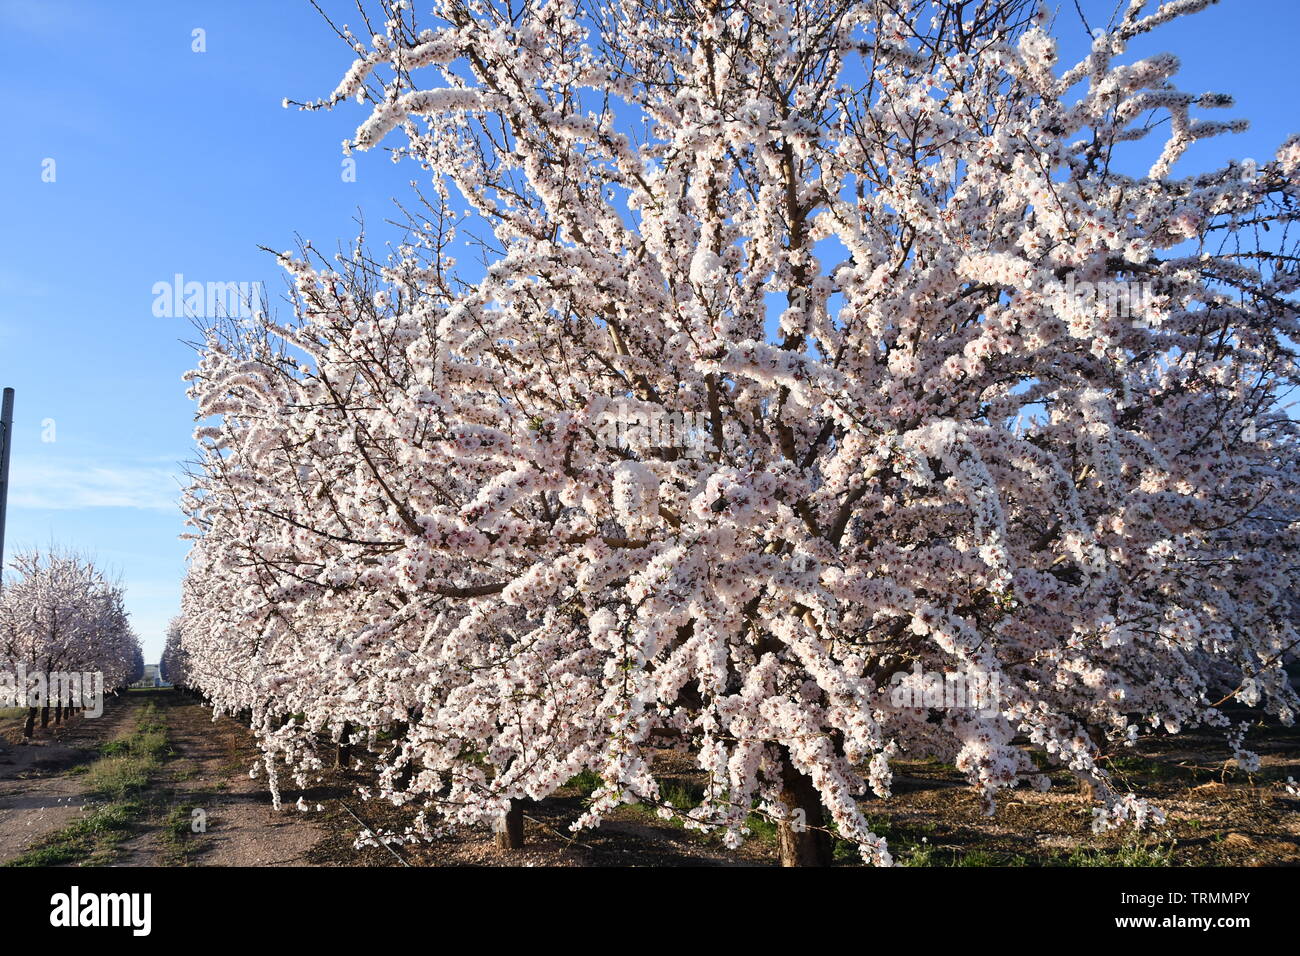 Almond trees in bloom Stock Photo